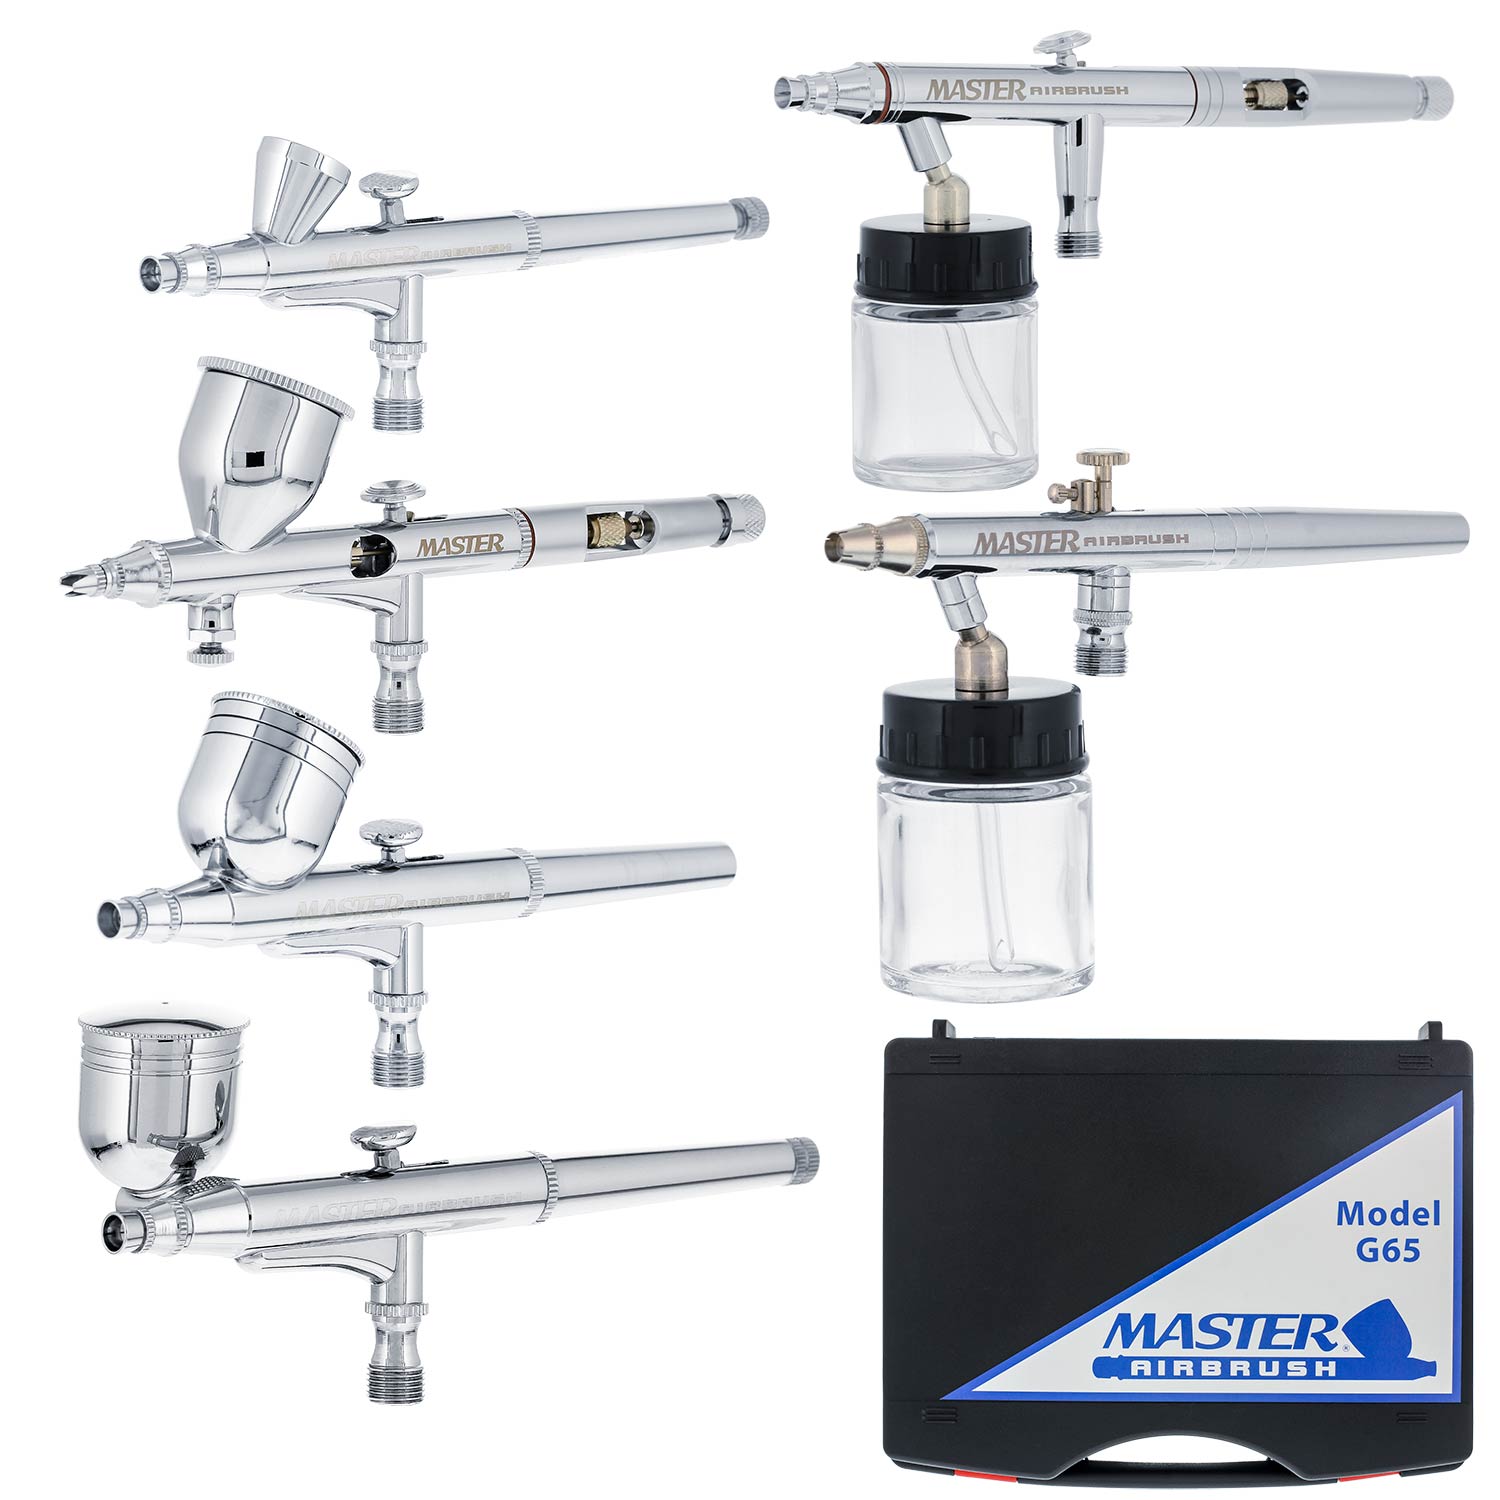 8 Master Hi-Flow S62 Dual-Action Siphon Feed Airbrushes with 0.5 mm Tips,  3/4 oz. Bottles, Cutaway Handles & Storage Case